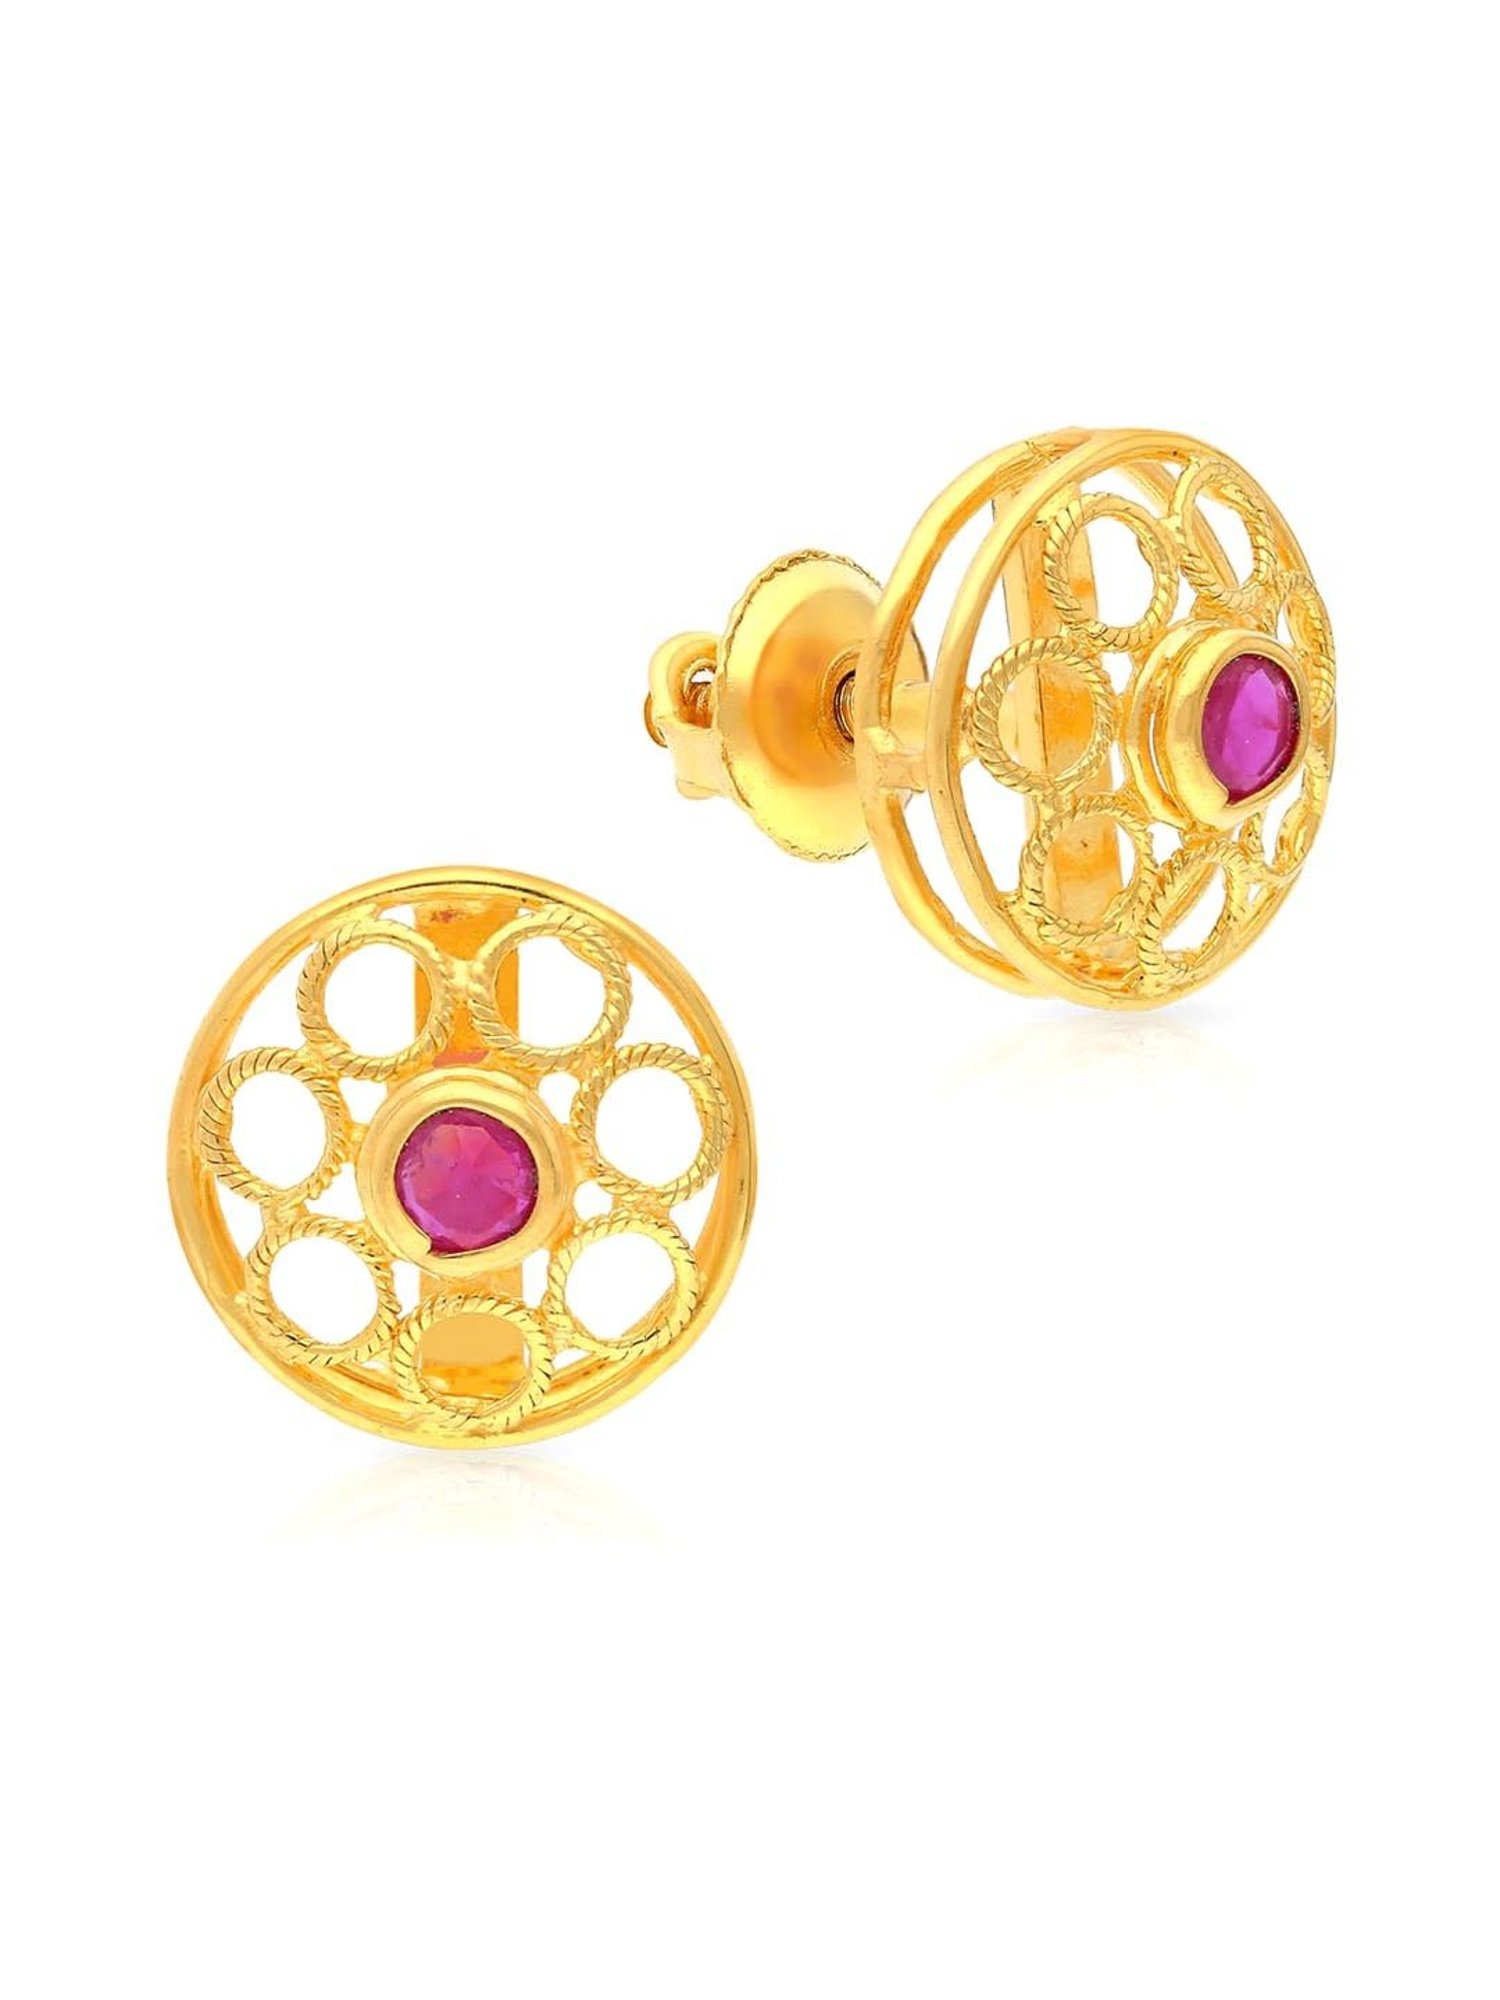 Modern Chic Gold and Diamond Stud Earrings